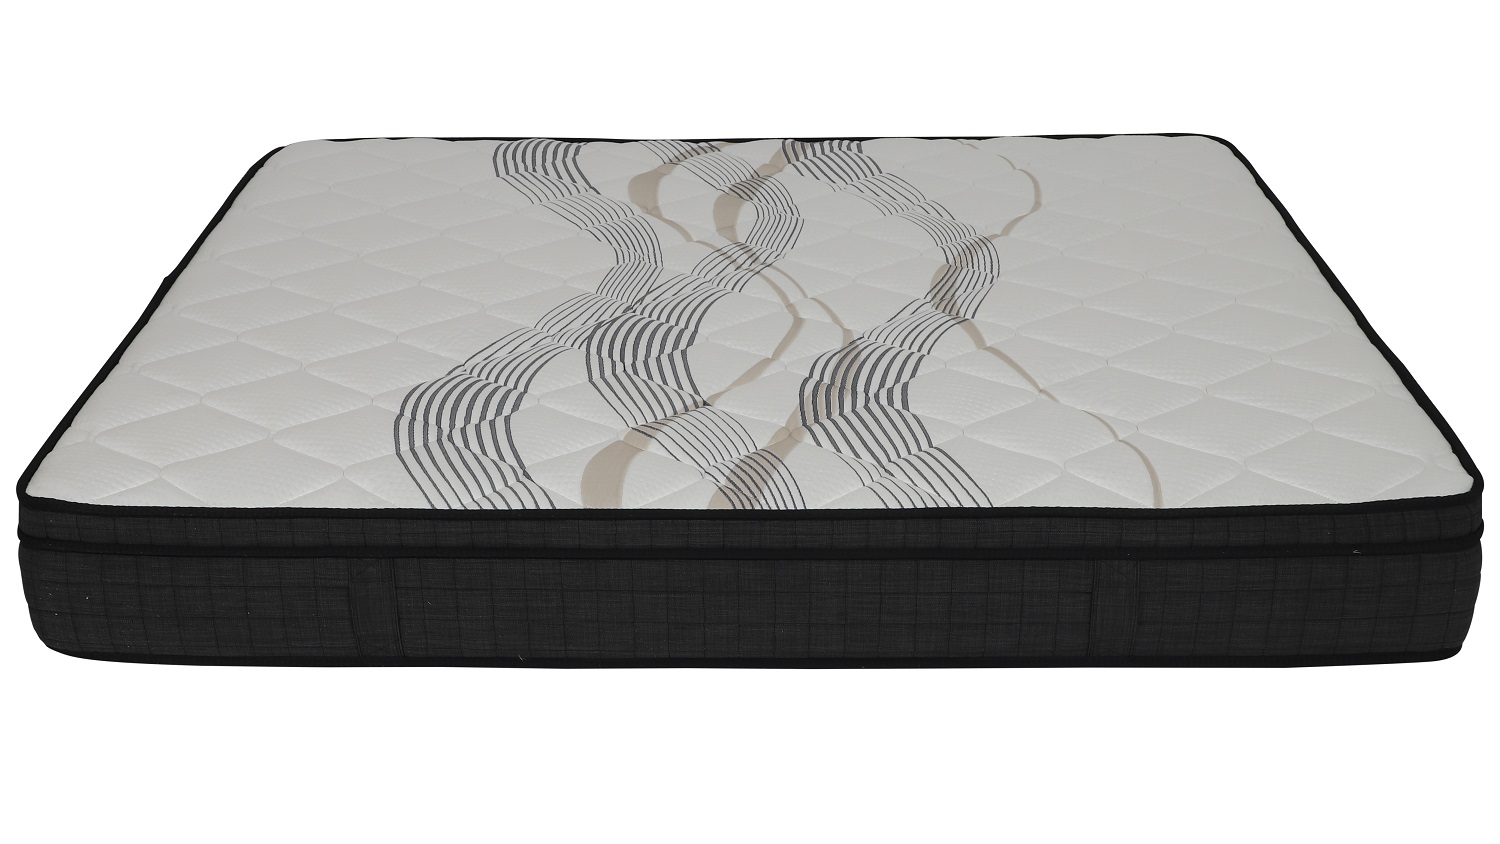 art and science gold mattress review